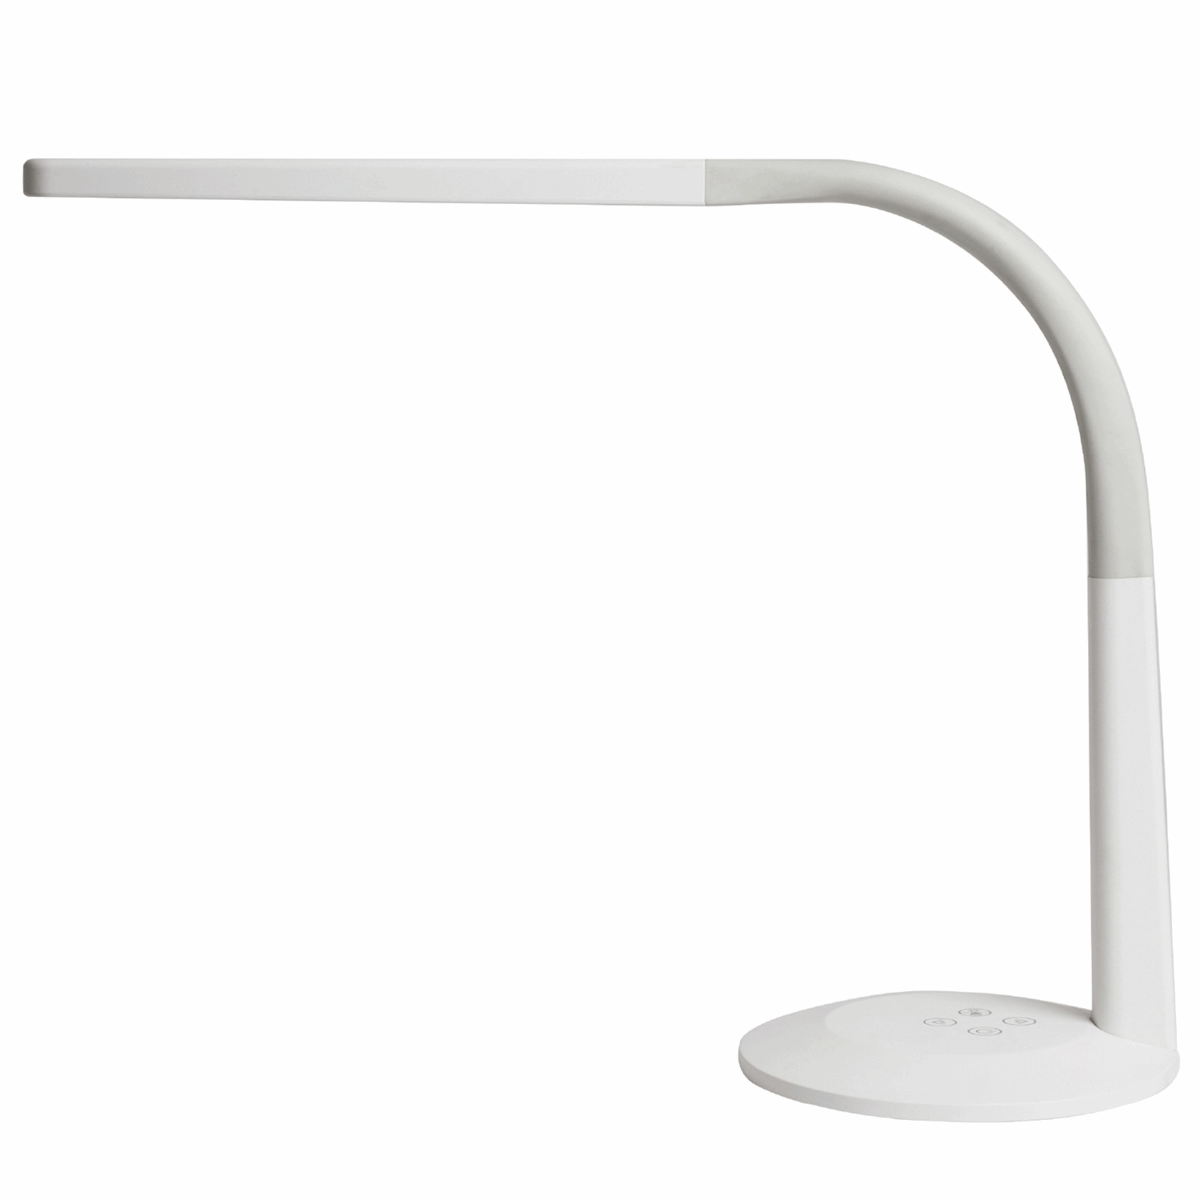 PURElite Touch LED Desk Lamp - 4 colour settings from Warm to Cool